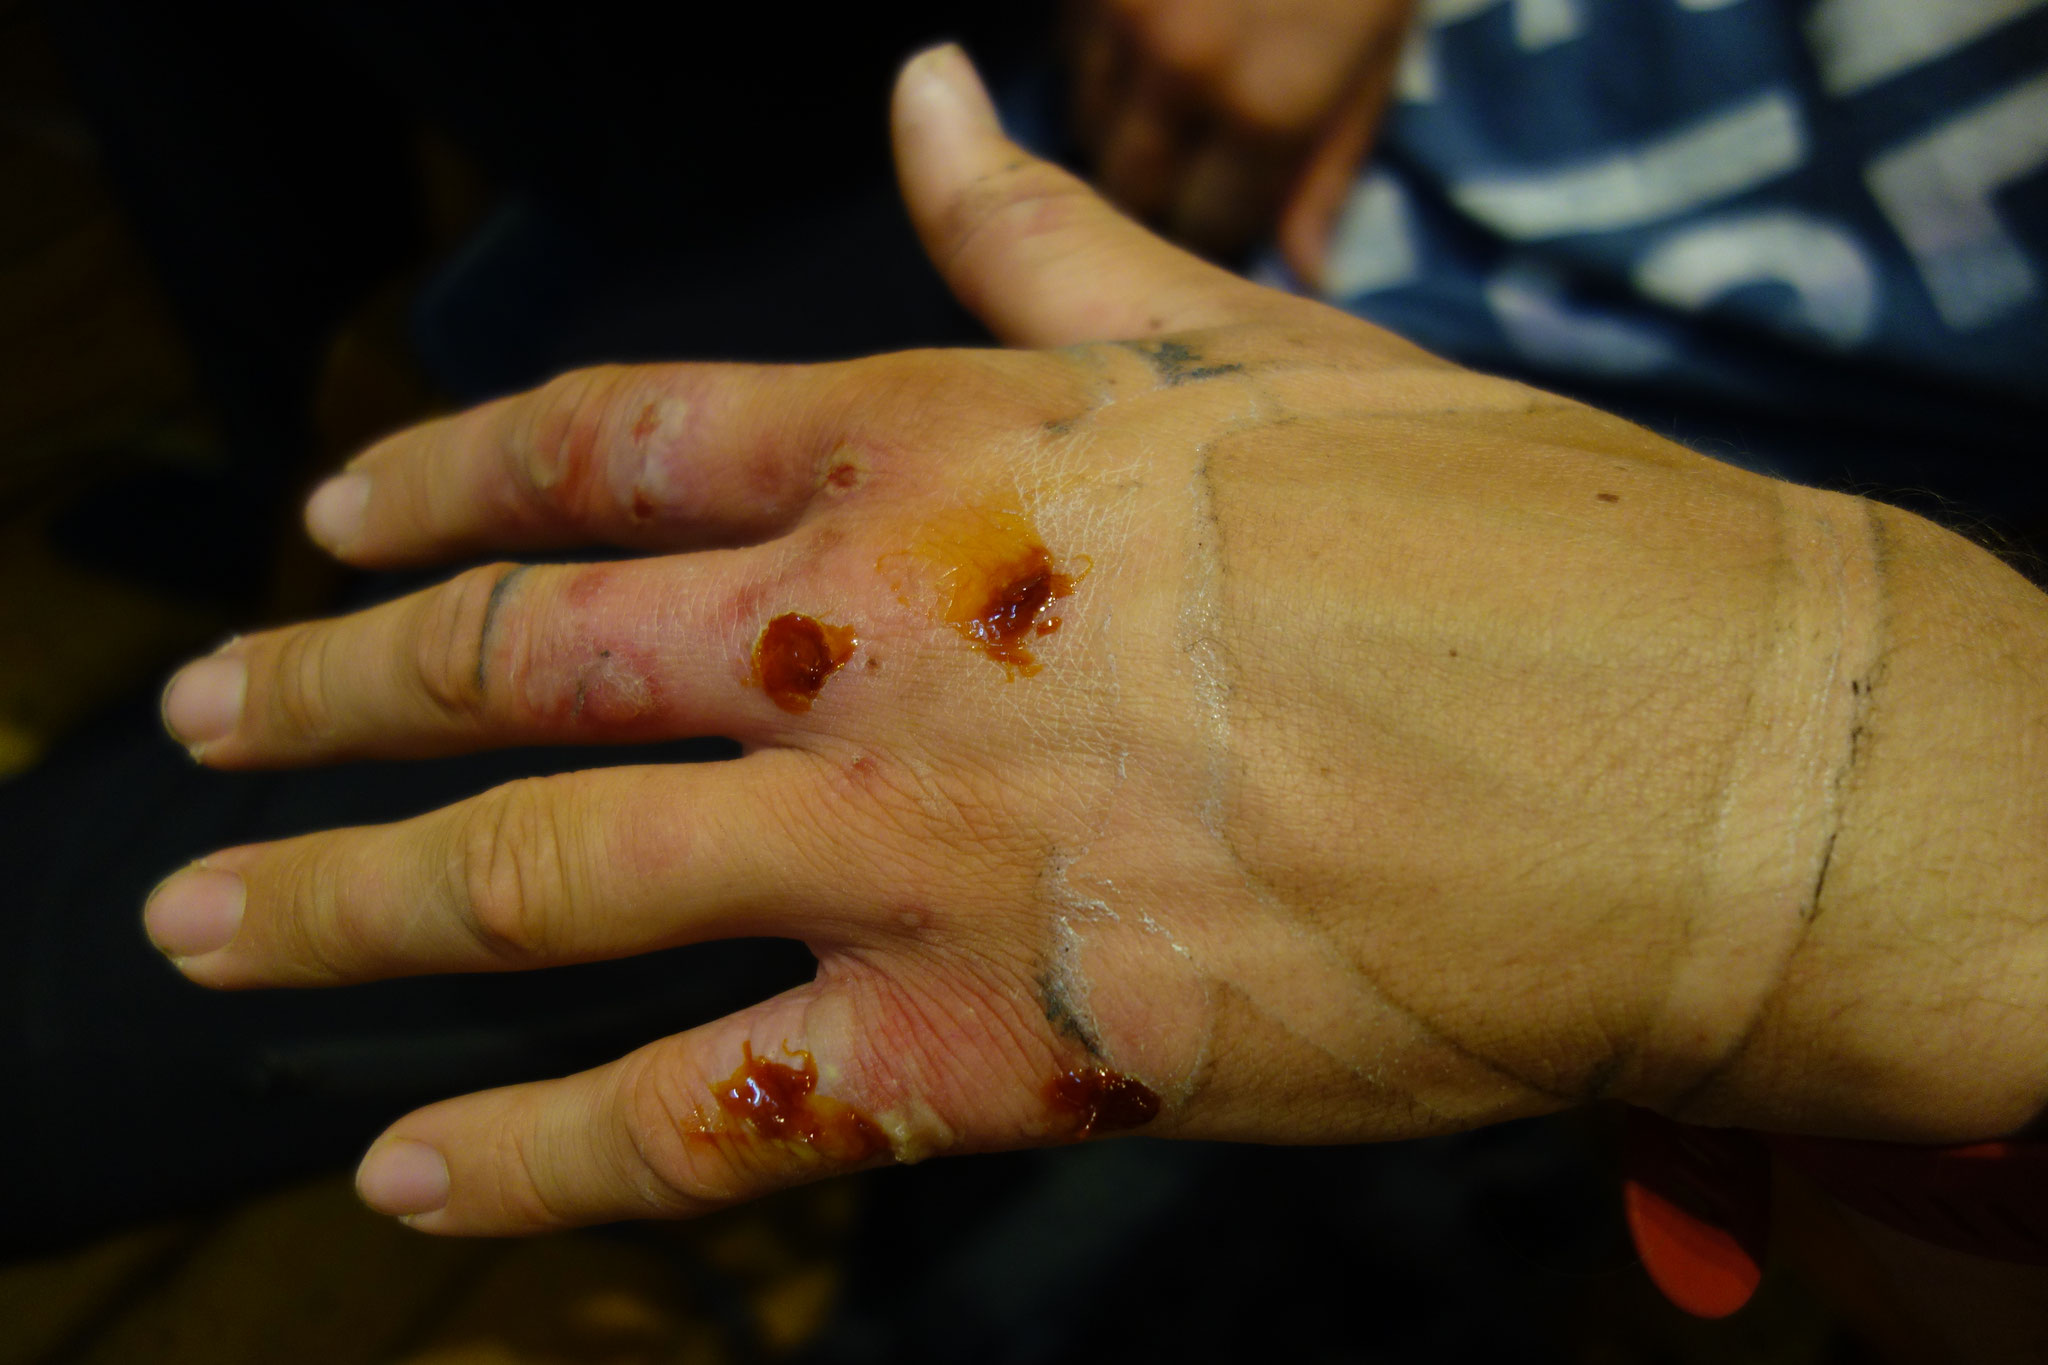 The only injury which is worth mentioning - Jens' hand 